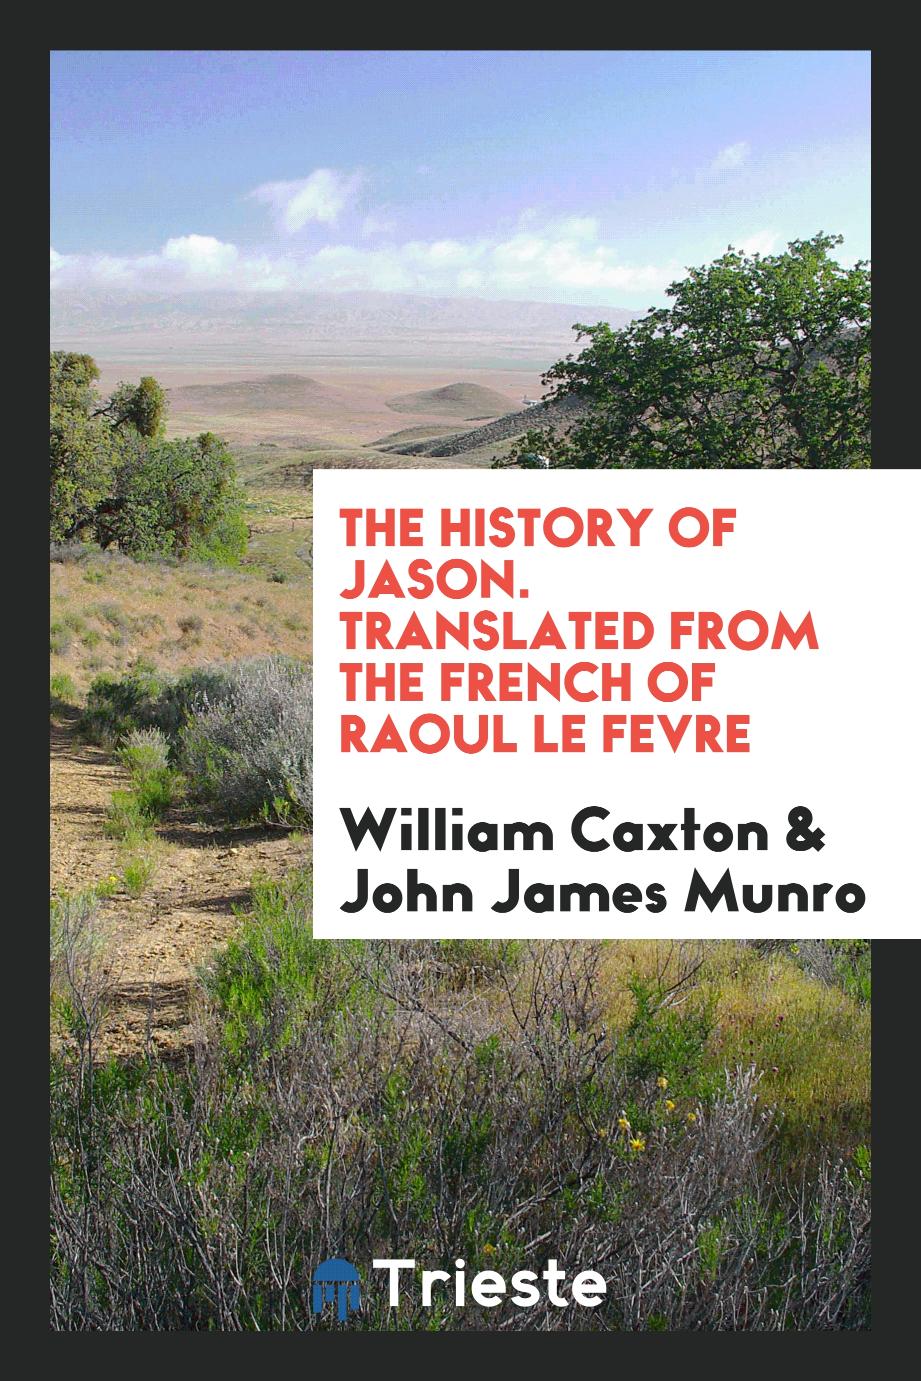 The history of Jason. Translated from the French of Raoul Le Fevre